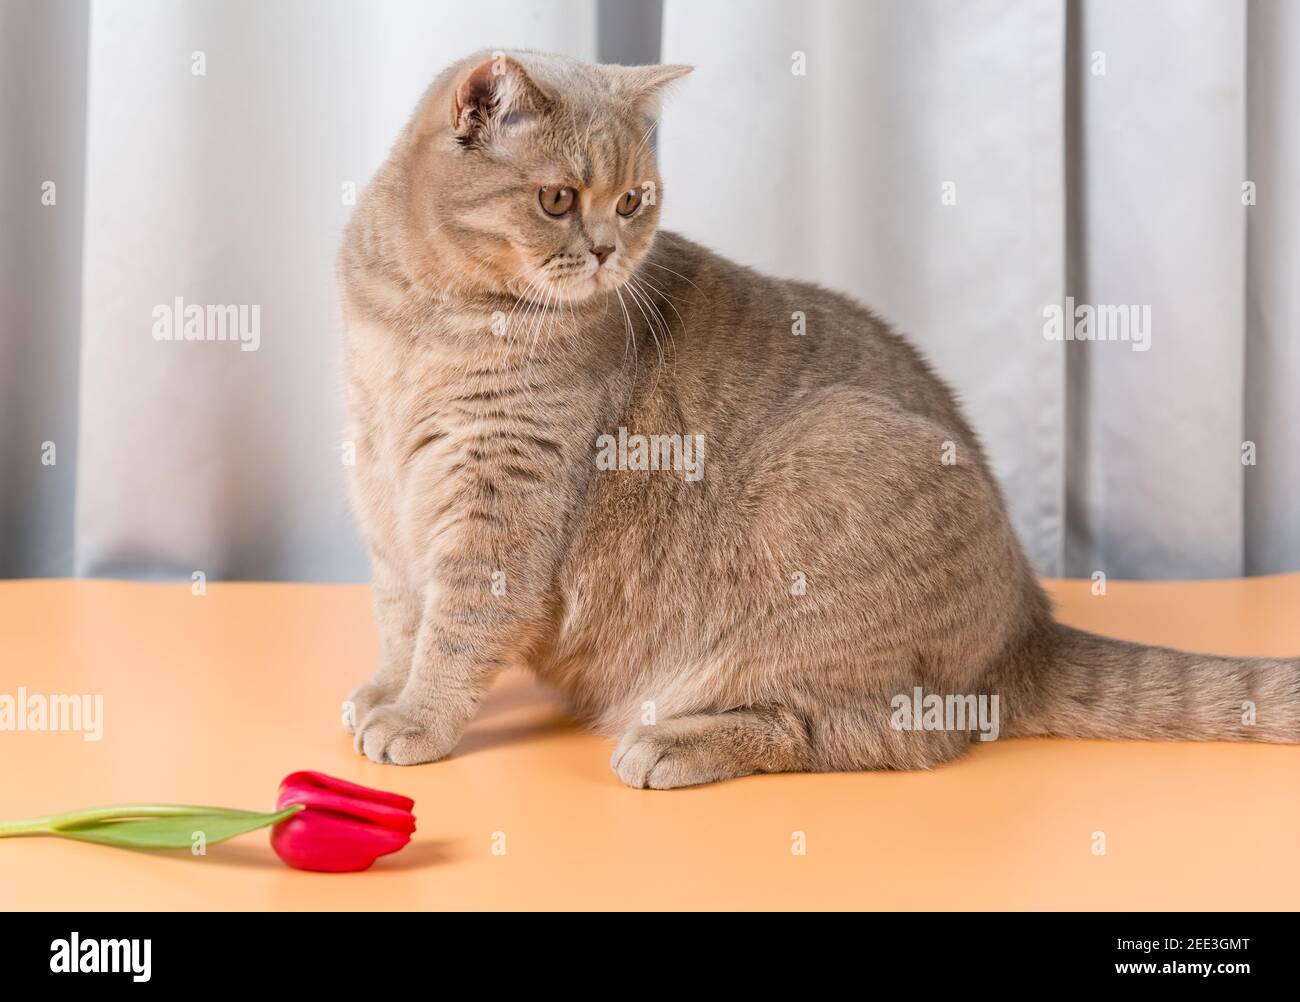 A British Shorthair cat sits next to a red tulip flower and looks away Stock Photo